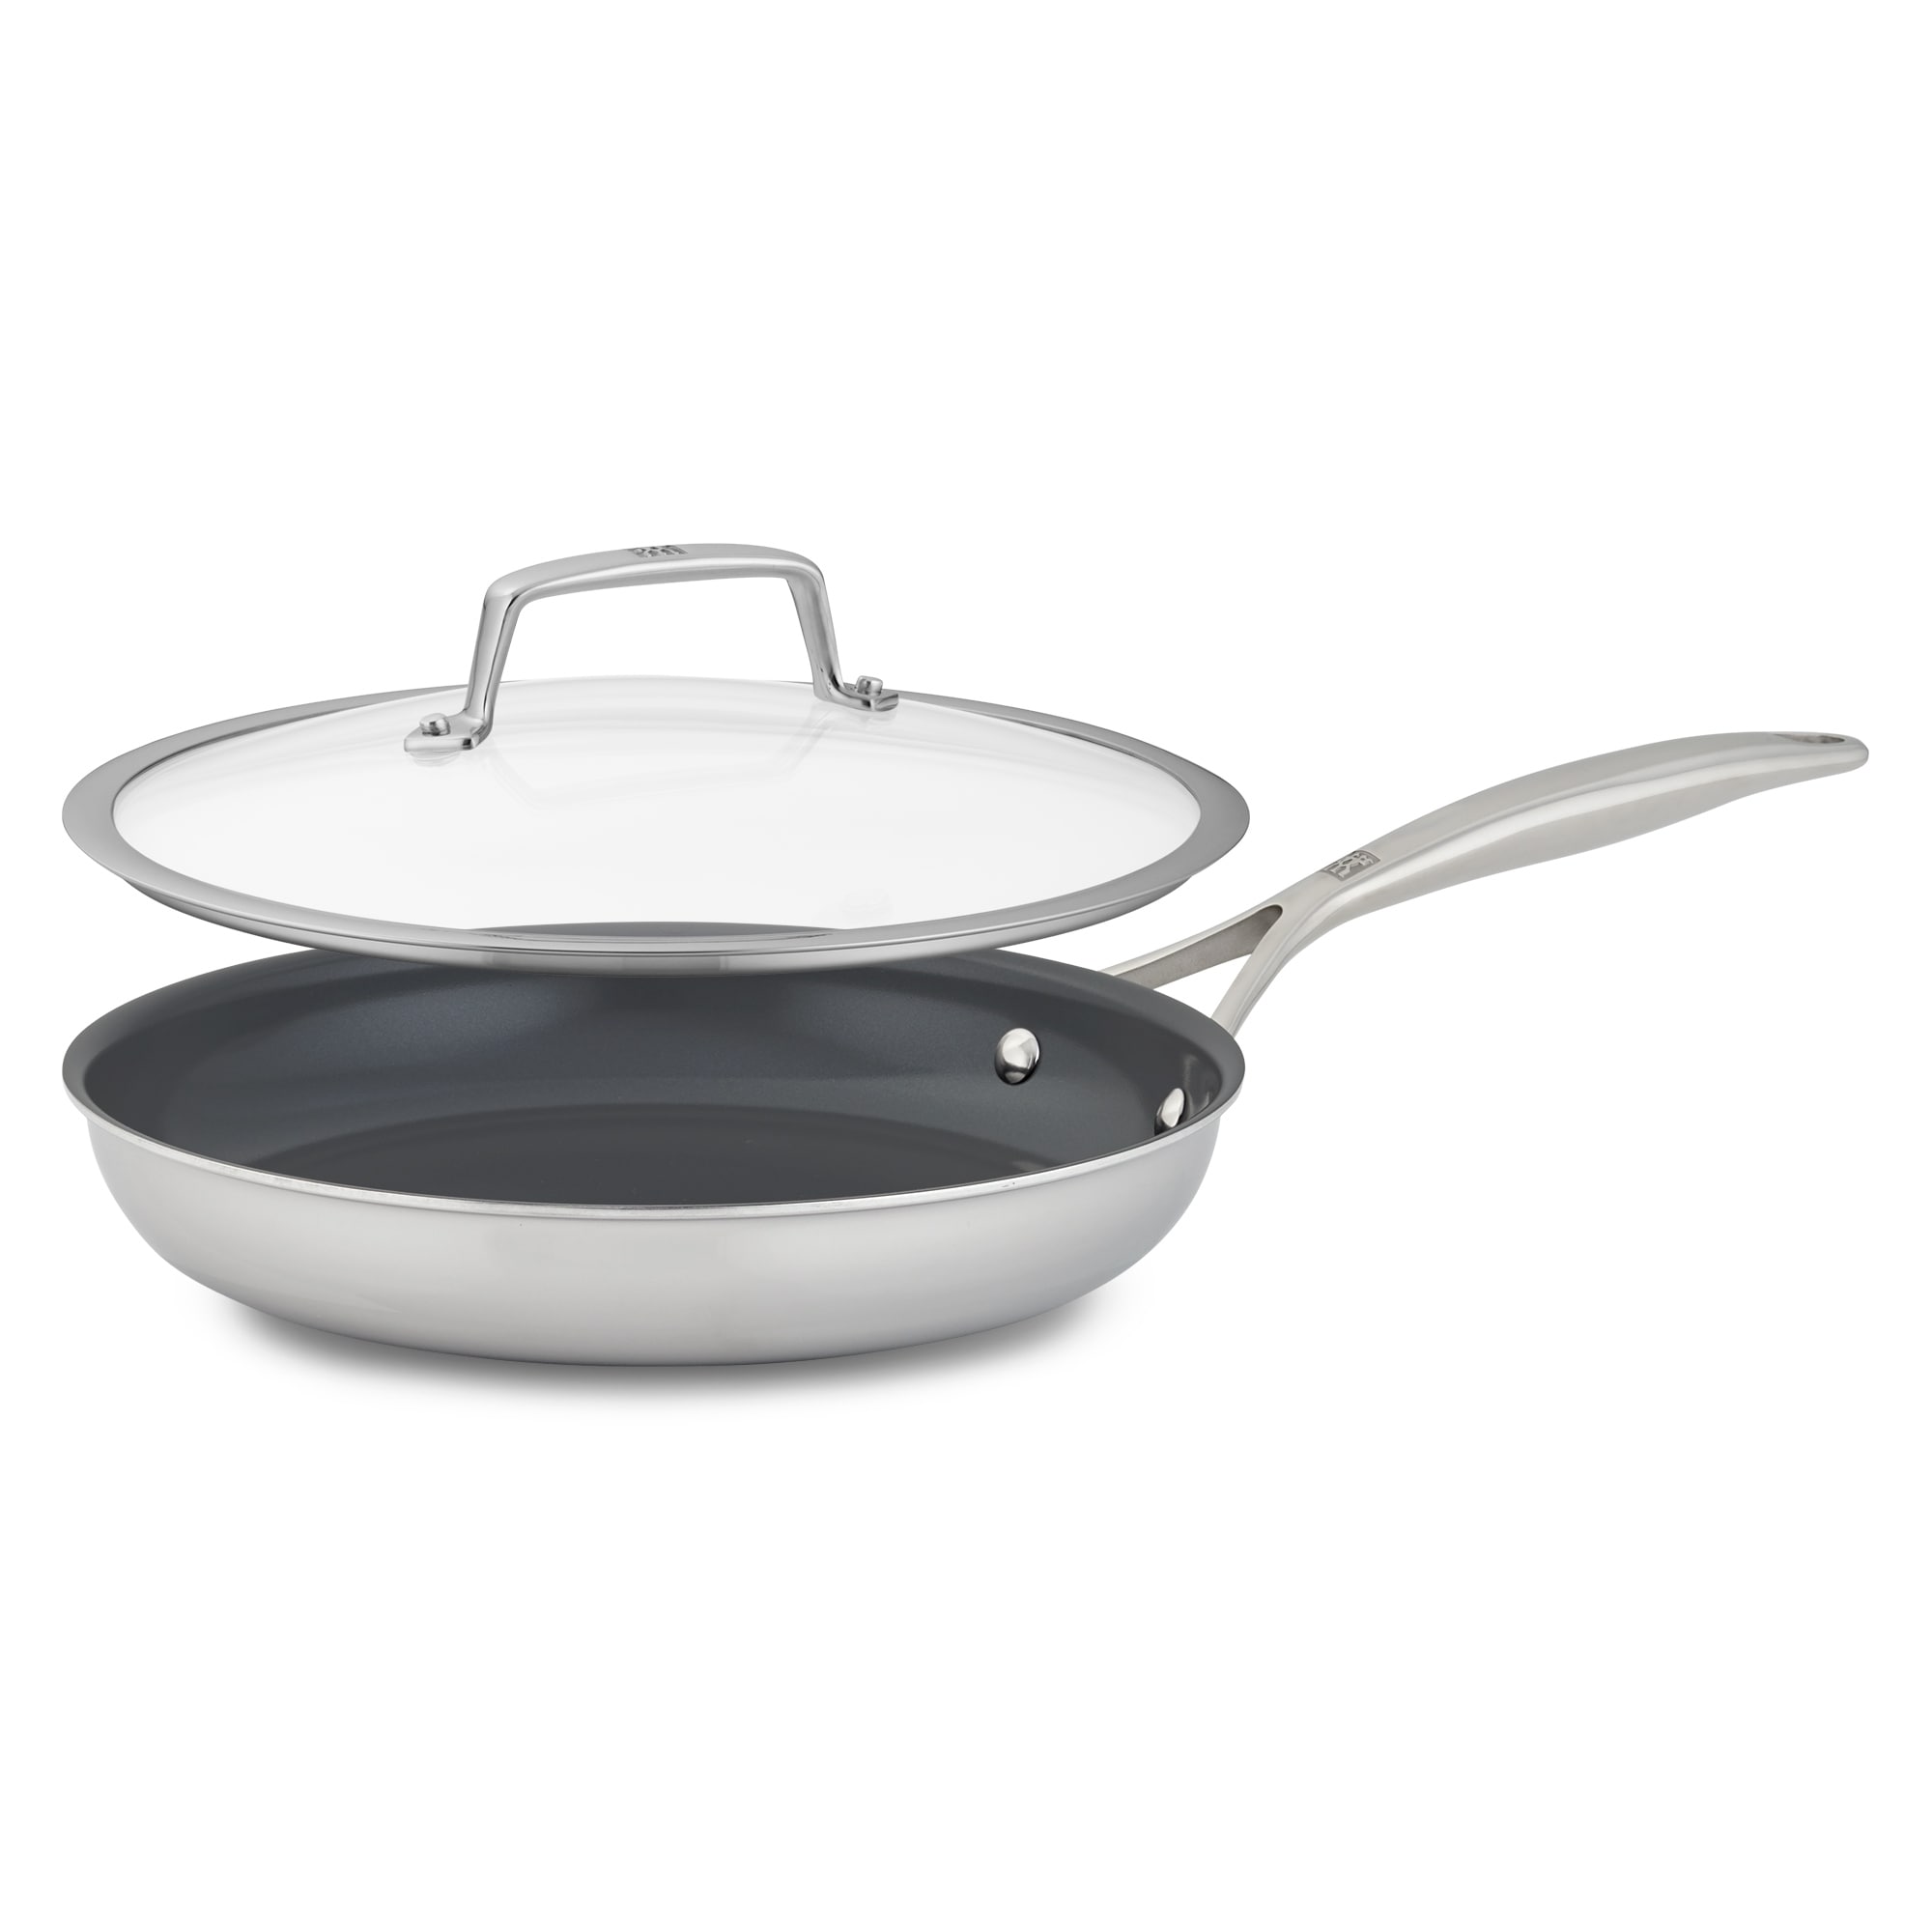 ZWILLING Energy Plus 8-inch Stainless Steel Ceramic Nonstick Fry